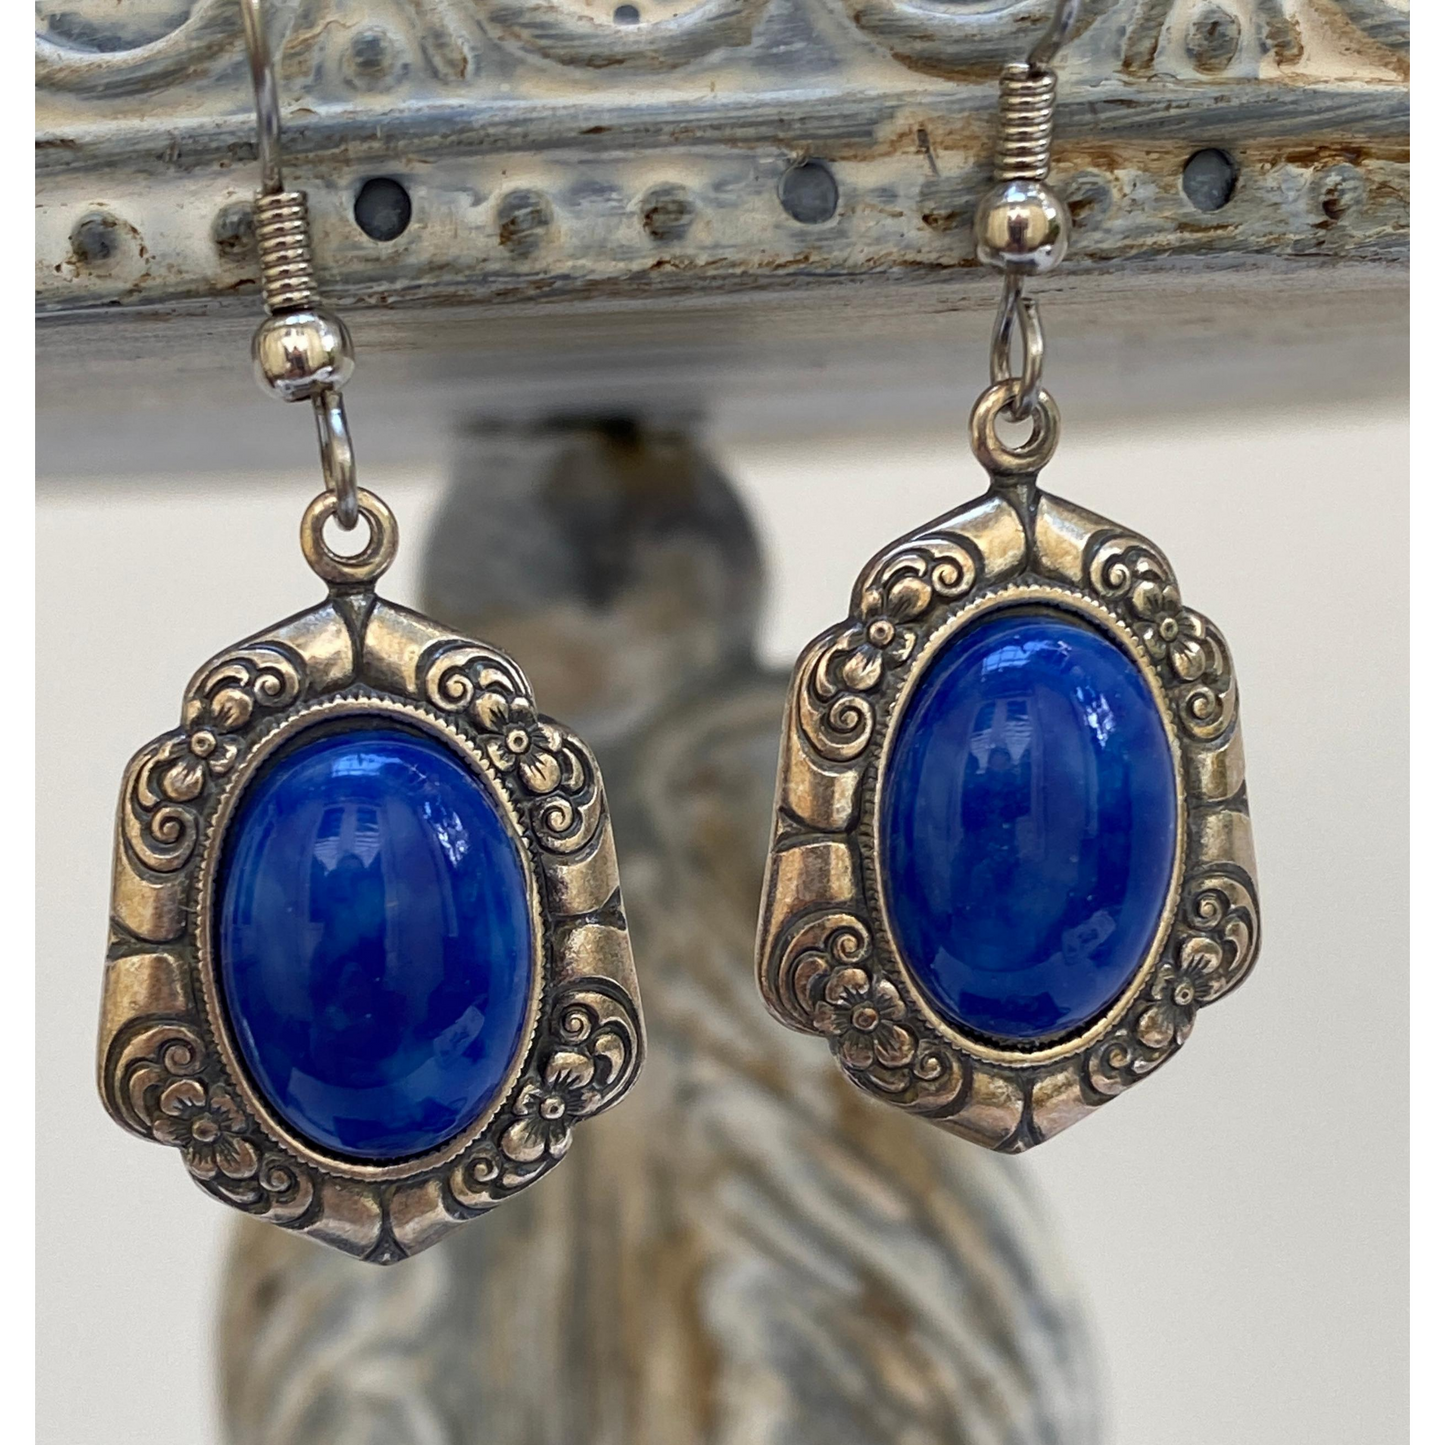 Earrings, Vintage Antique Silver Setting, Oval Faux Lapis Setting, Handmade in USA